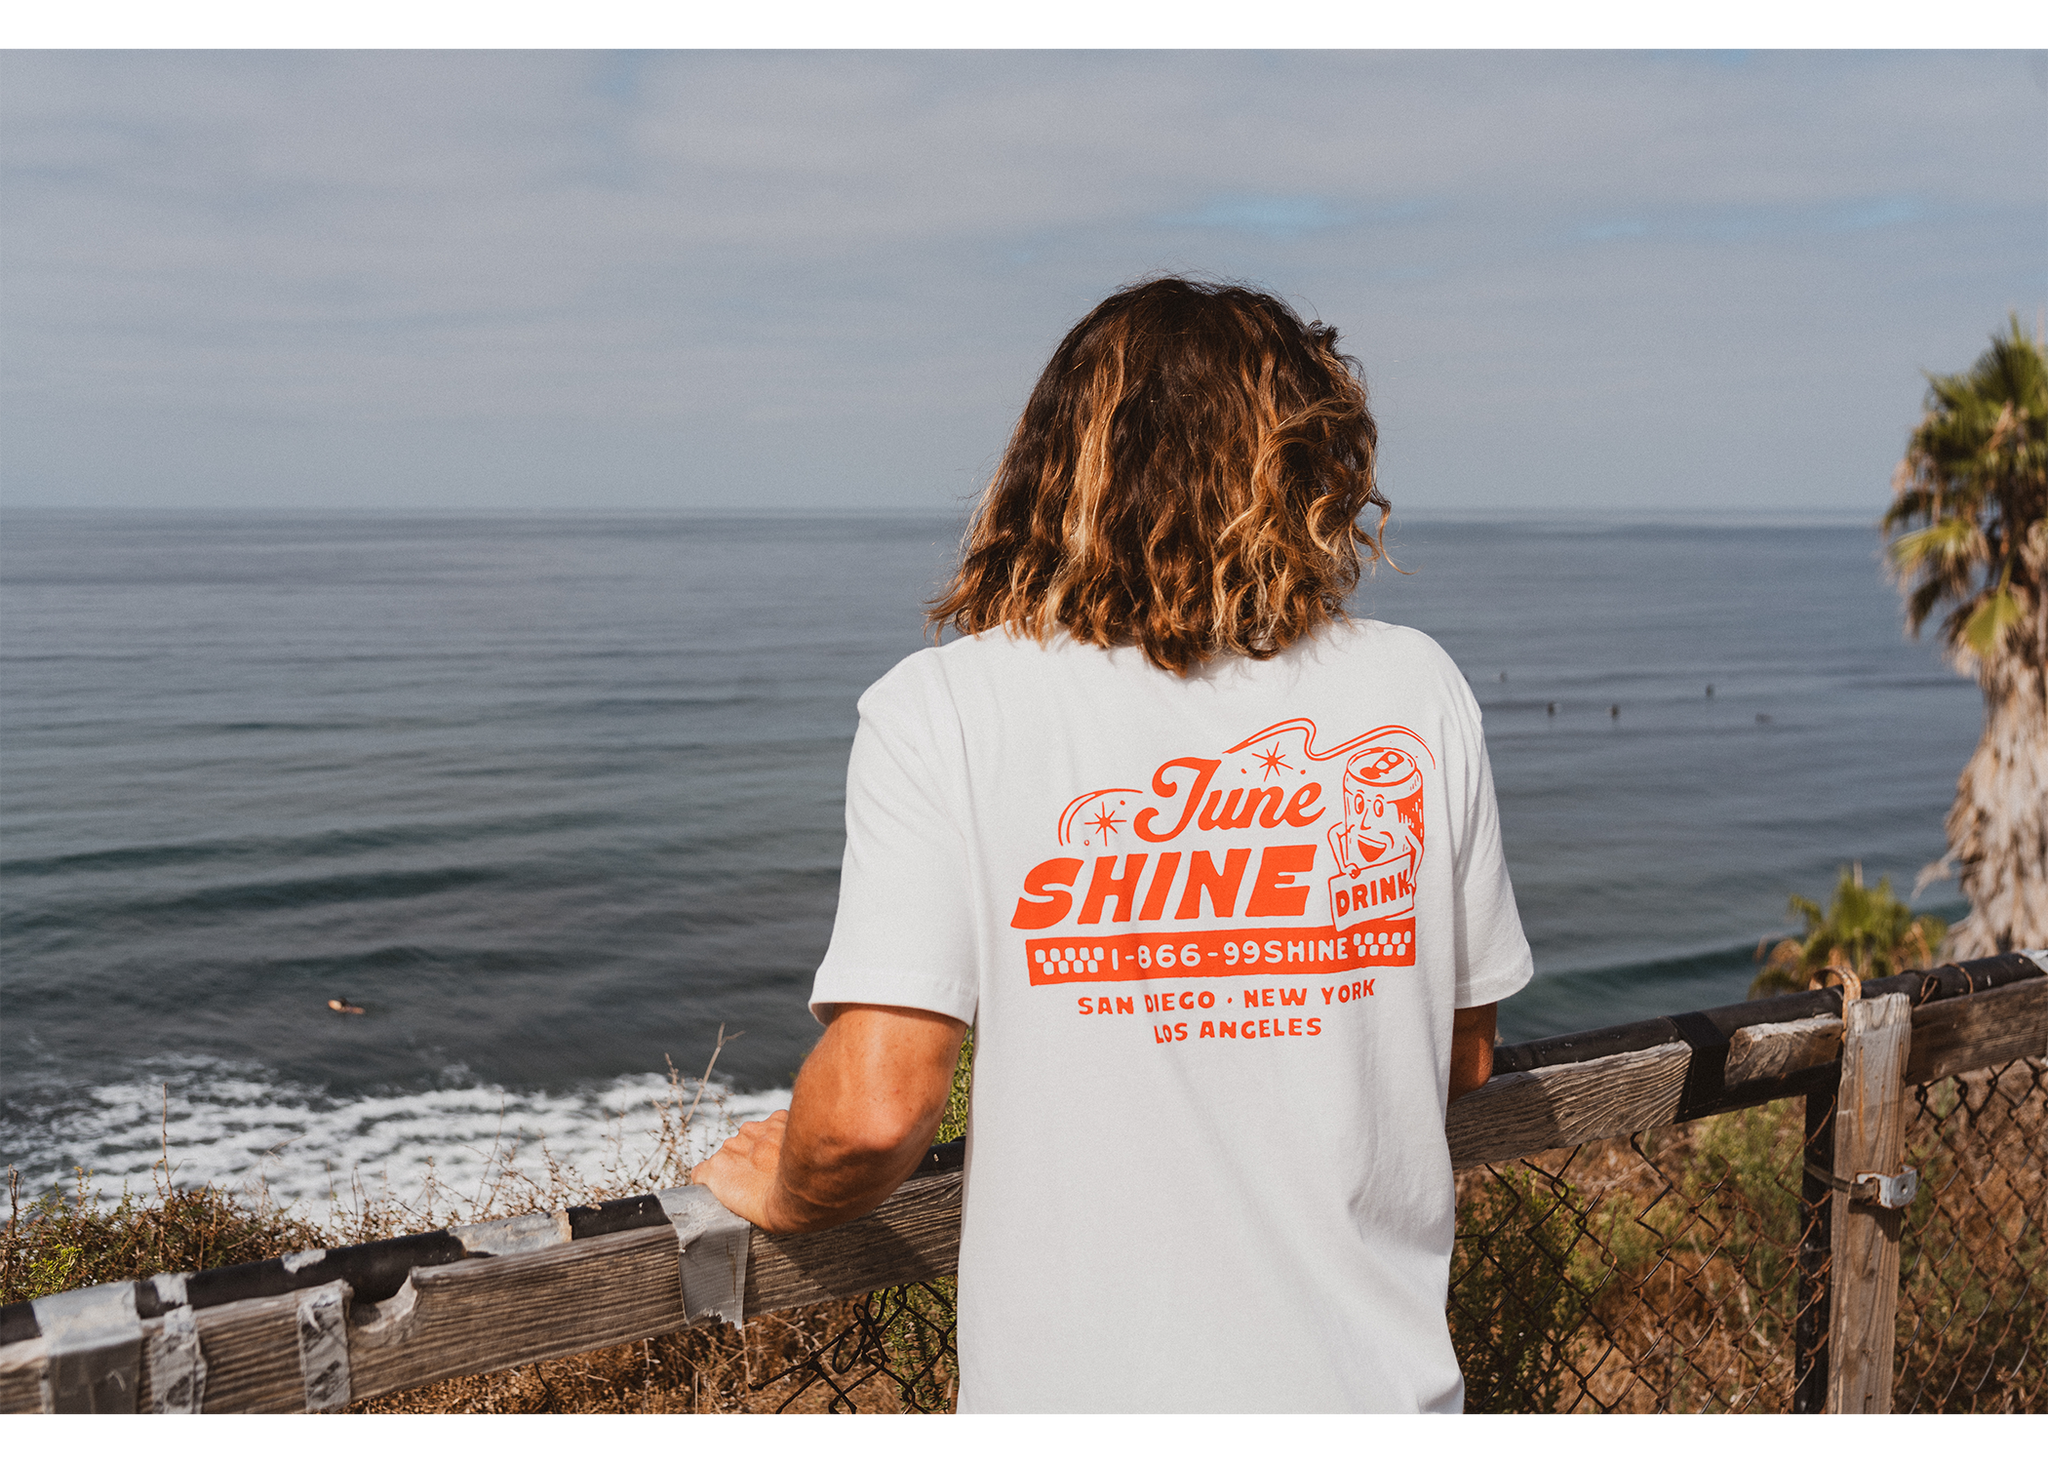 Long haired man at the beach wearing White tshirt with red writing that reads: JuneShine, 1-866-99SHINE San Diego New York Los Angeles with a popped can